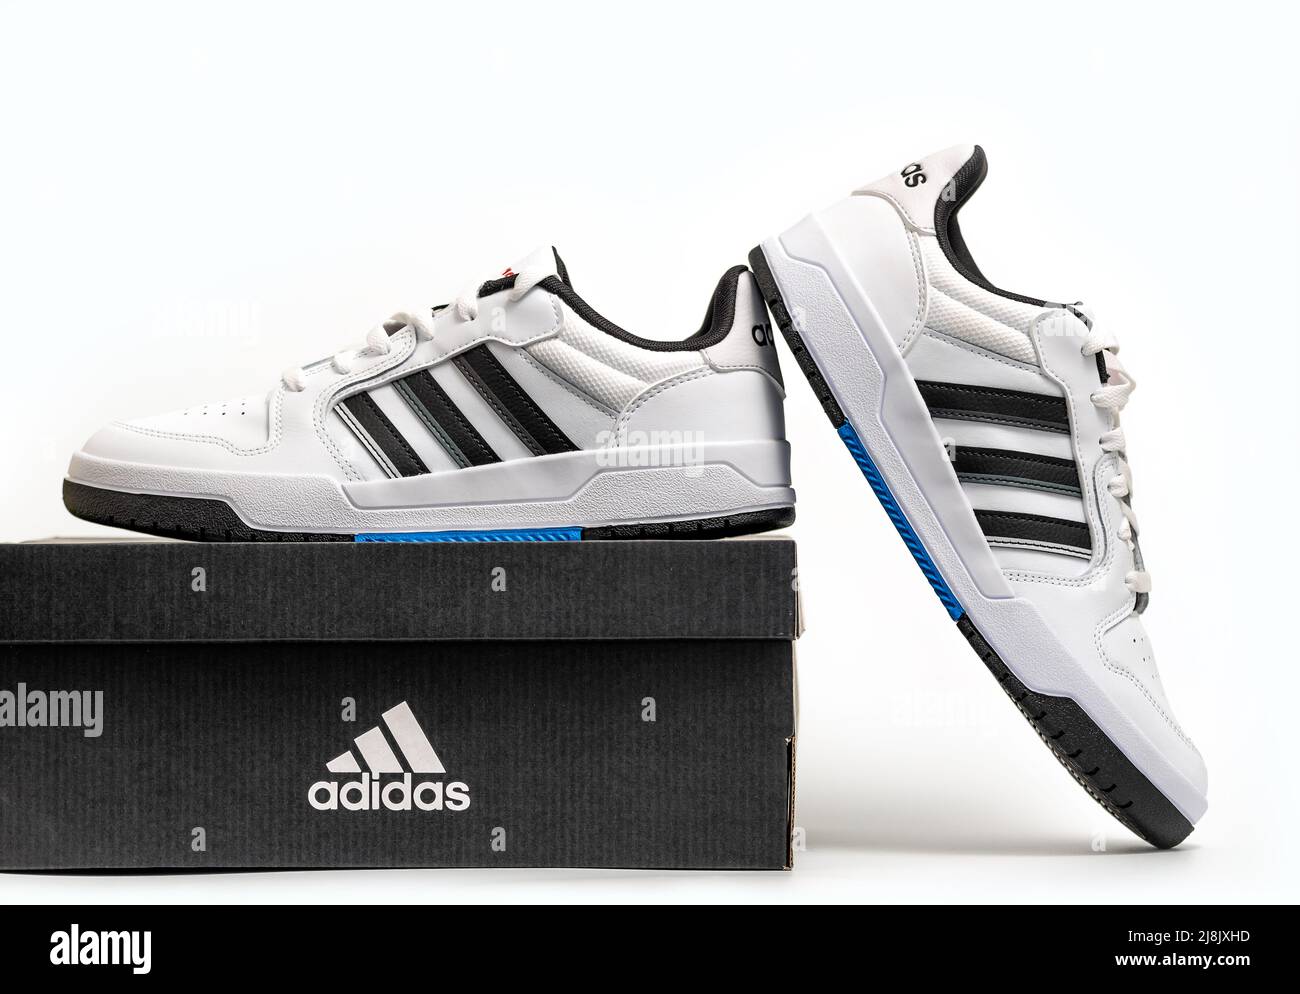 Belgrade, Serbia - May 11, 2022. New Adidas tennis shoes on white background with package box. New Adidas Sneakers or trainers on white background. Me Stock Photo